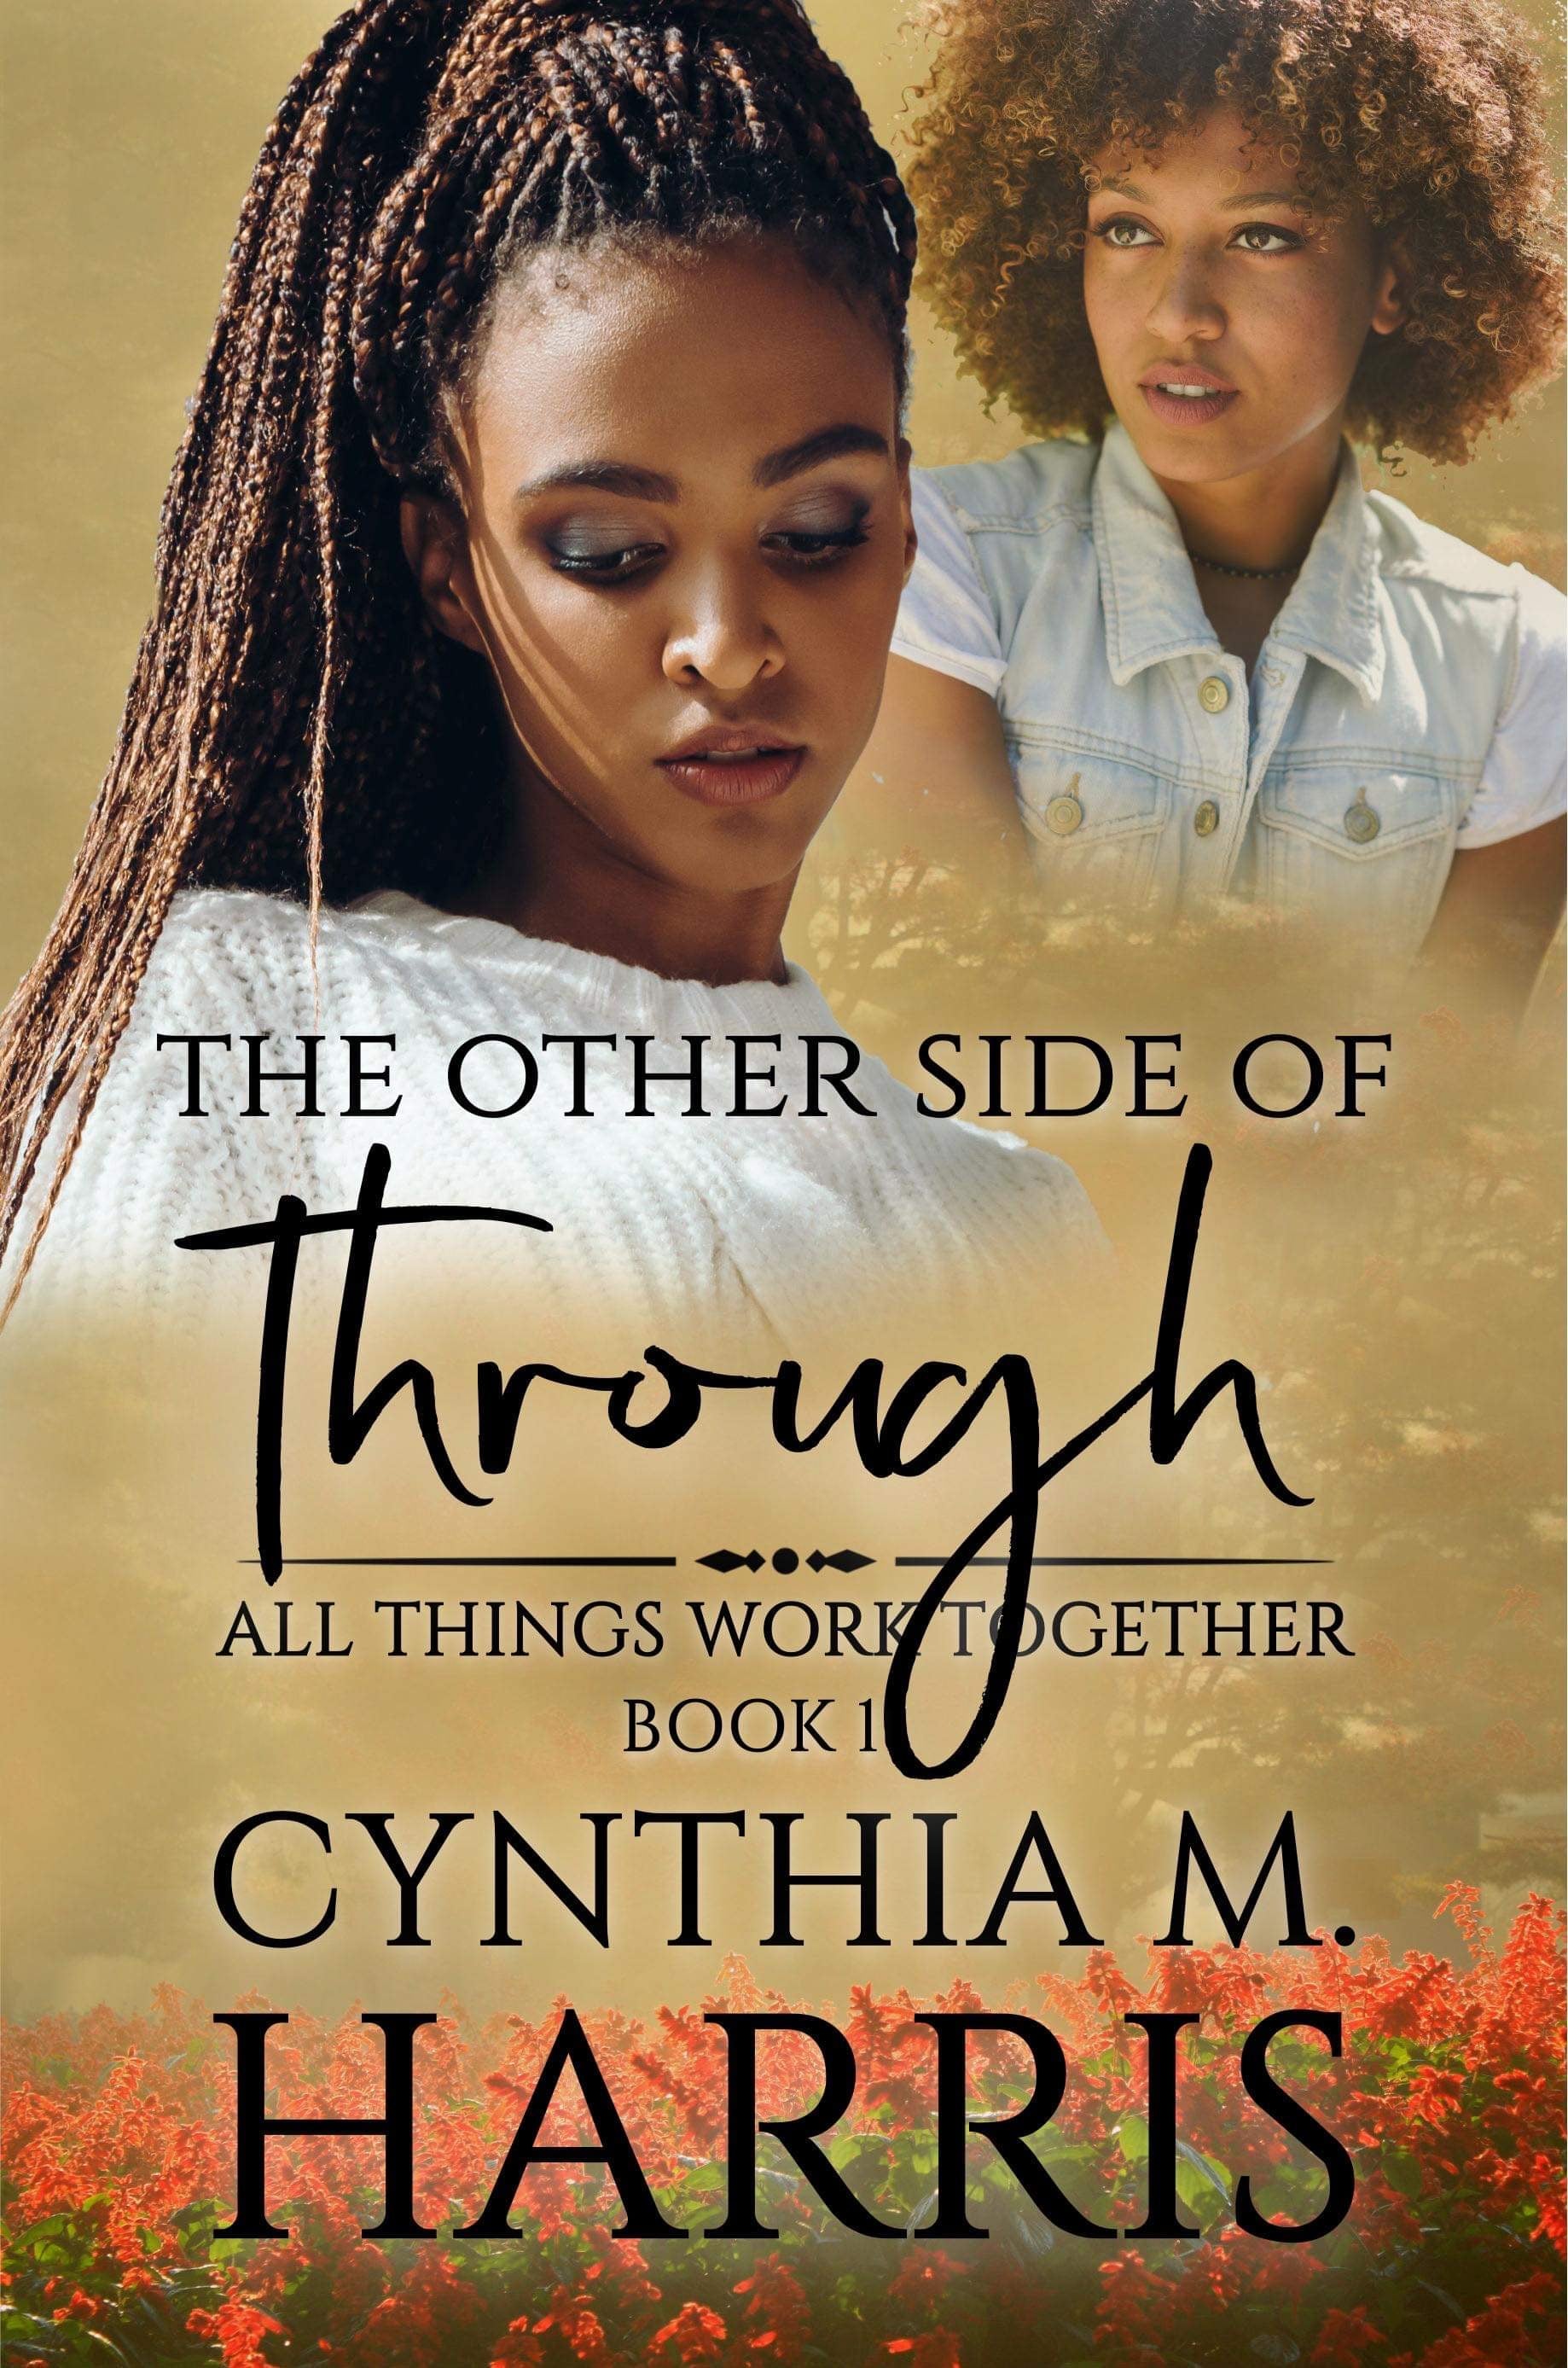 The Other Side Of Through: All Things Work Together